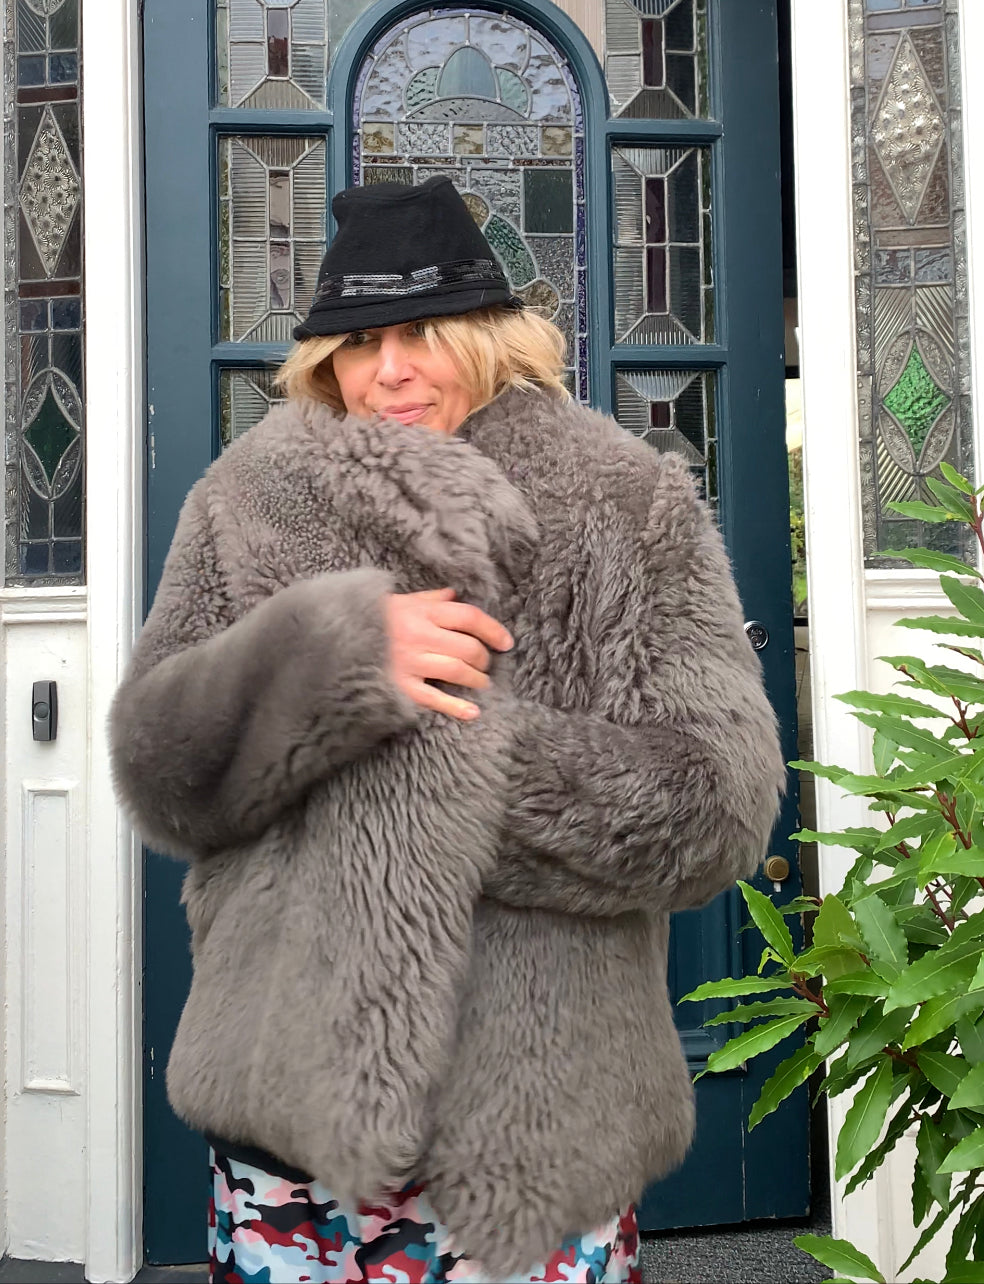 Rebecca walking out of front door in elama long sleeve shirt dress with hat a sheepskin coat